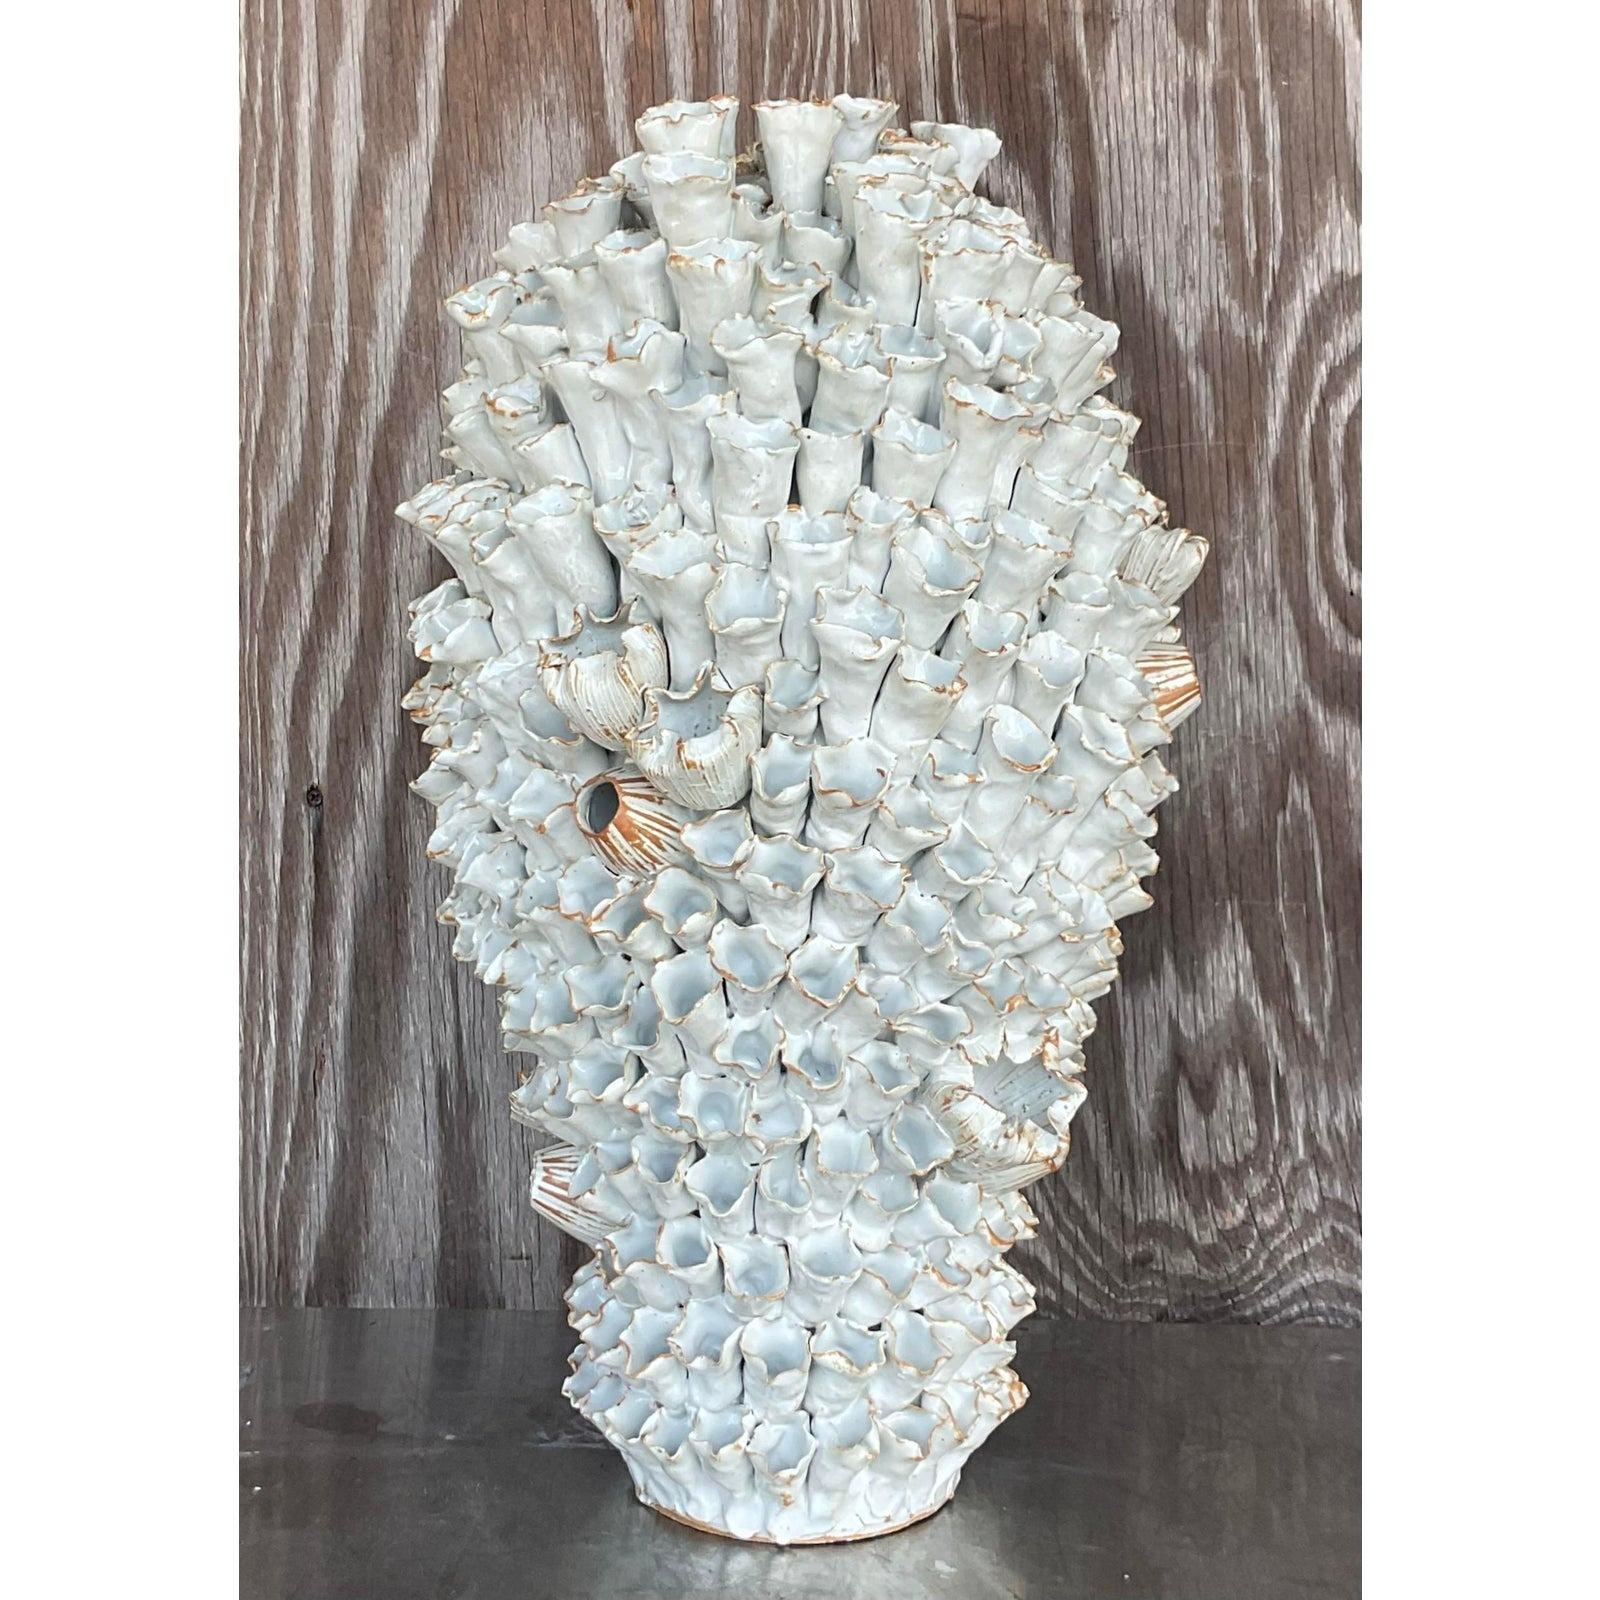 A fabulous Coastal glazed ceramic sculpture. A chic organic barnacle composition in an alabaster white with touches of chocolate brown. An incredible piece. Acquired from a Palm Beach estate.